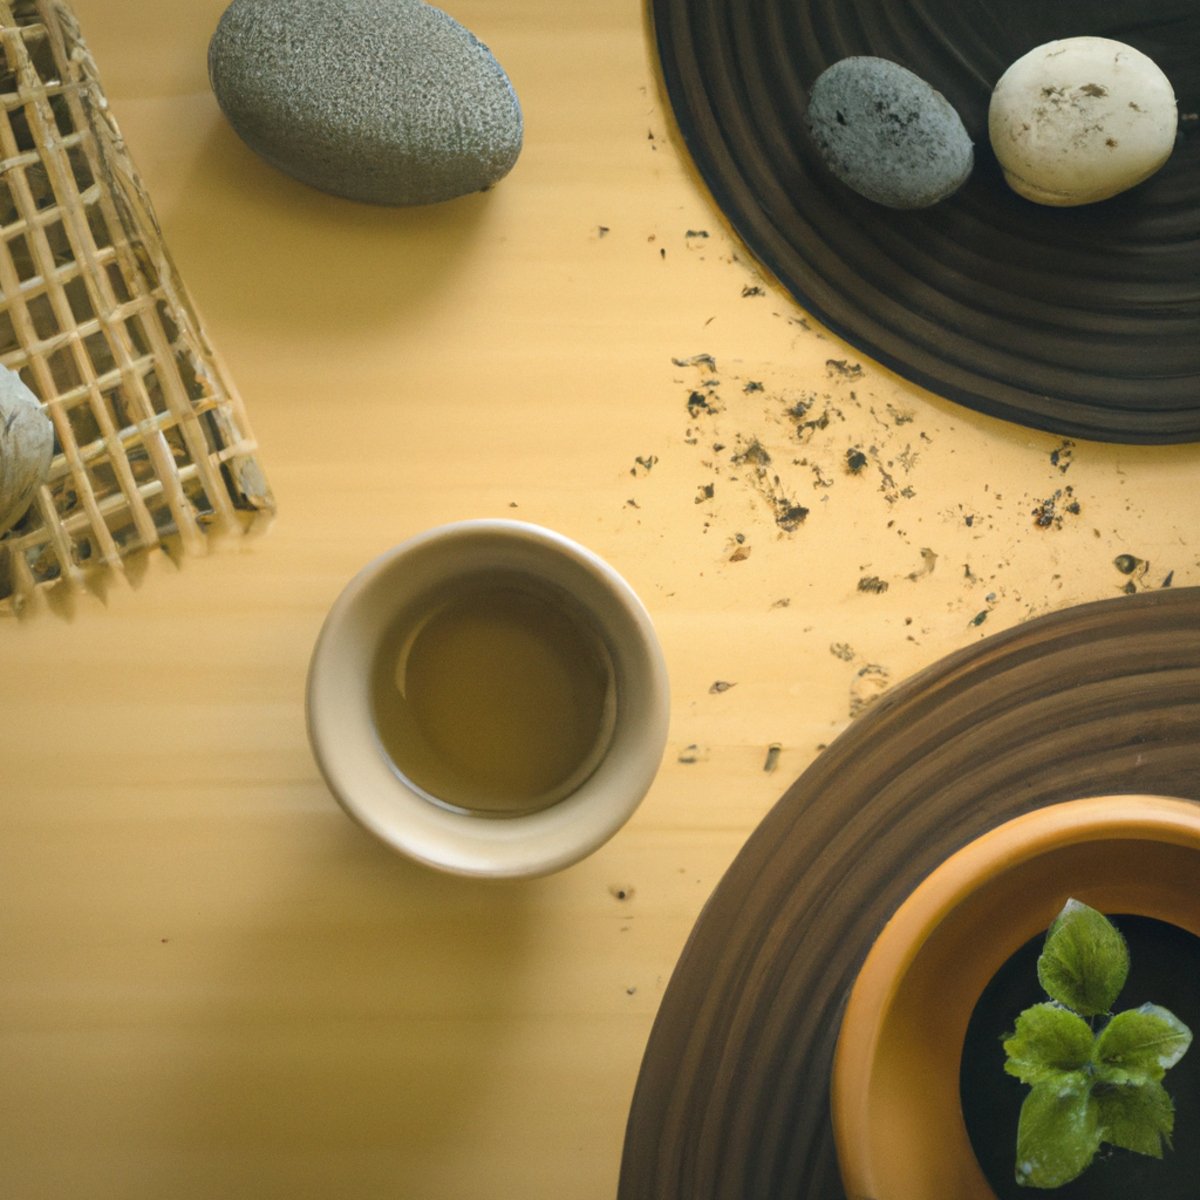 Mindfulness For Stress Reduction - A peaceful scene of a table with a plant, tea, book, and pen, inviting reflection and connection with nature.